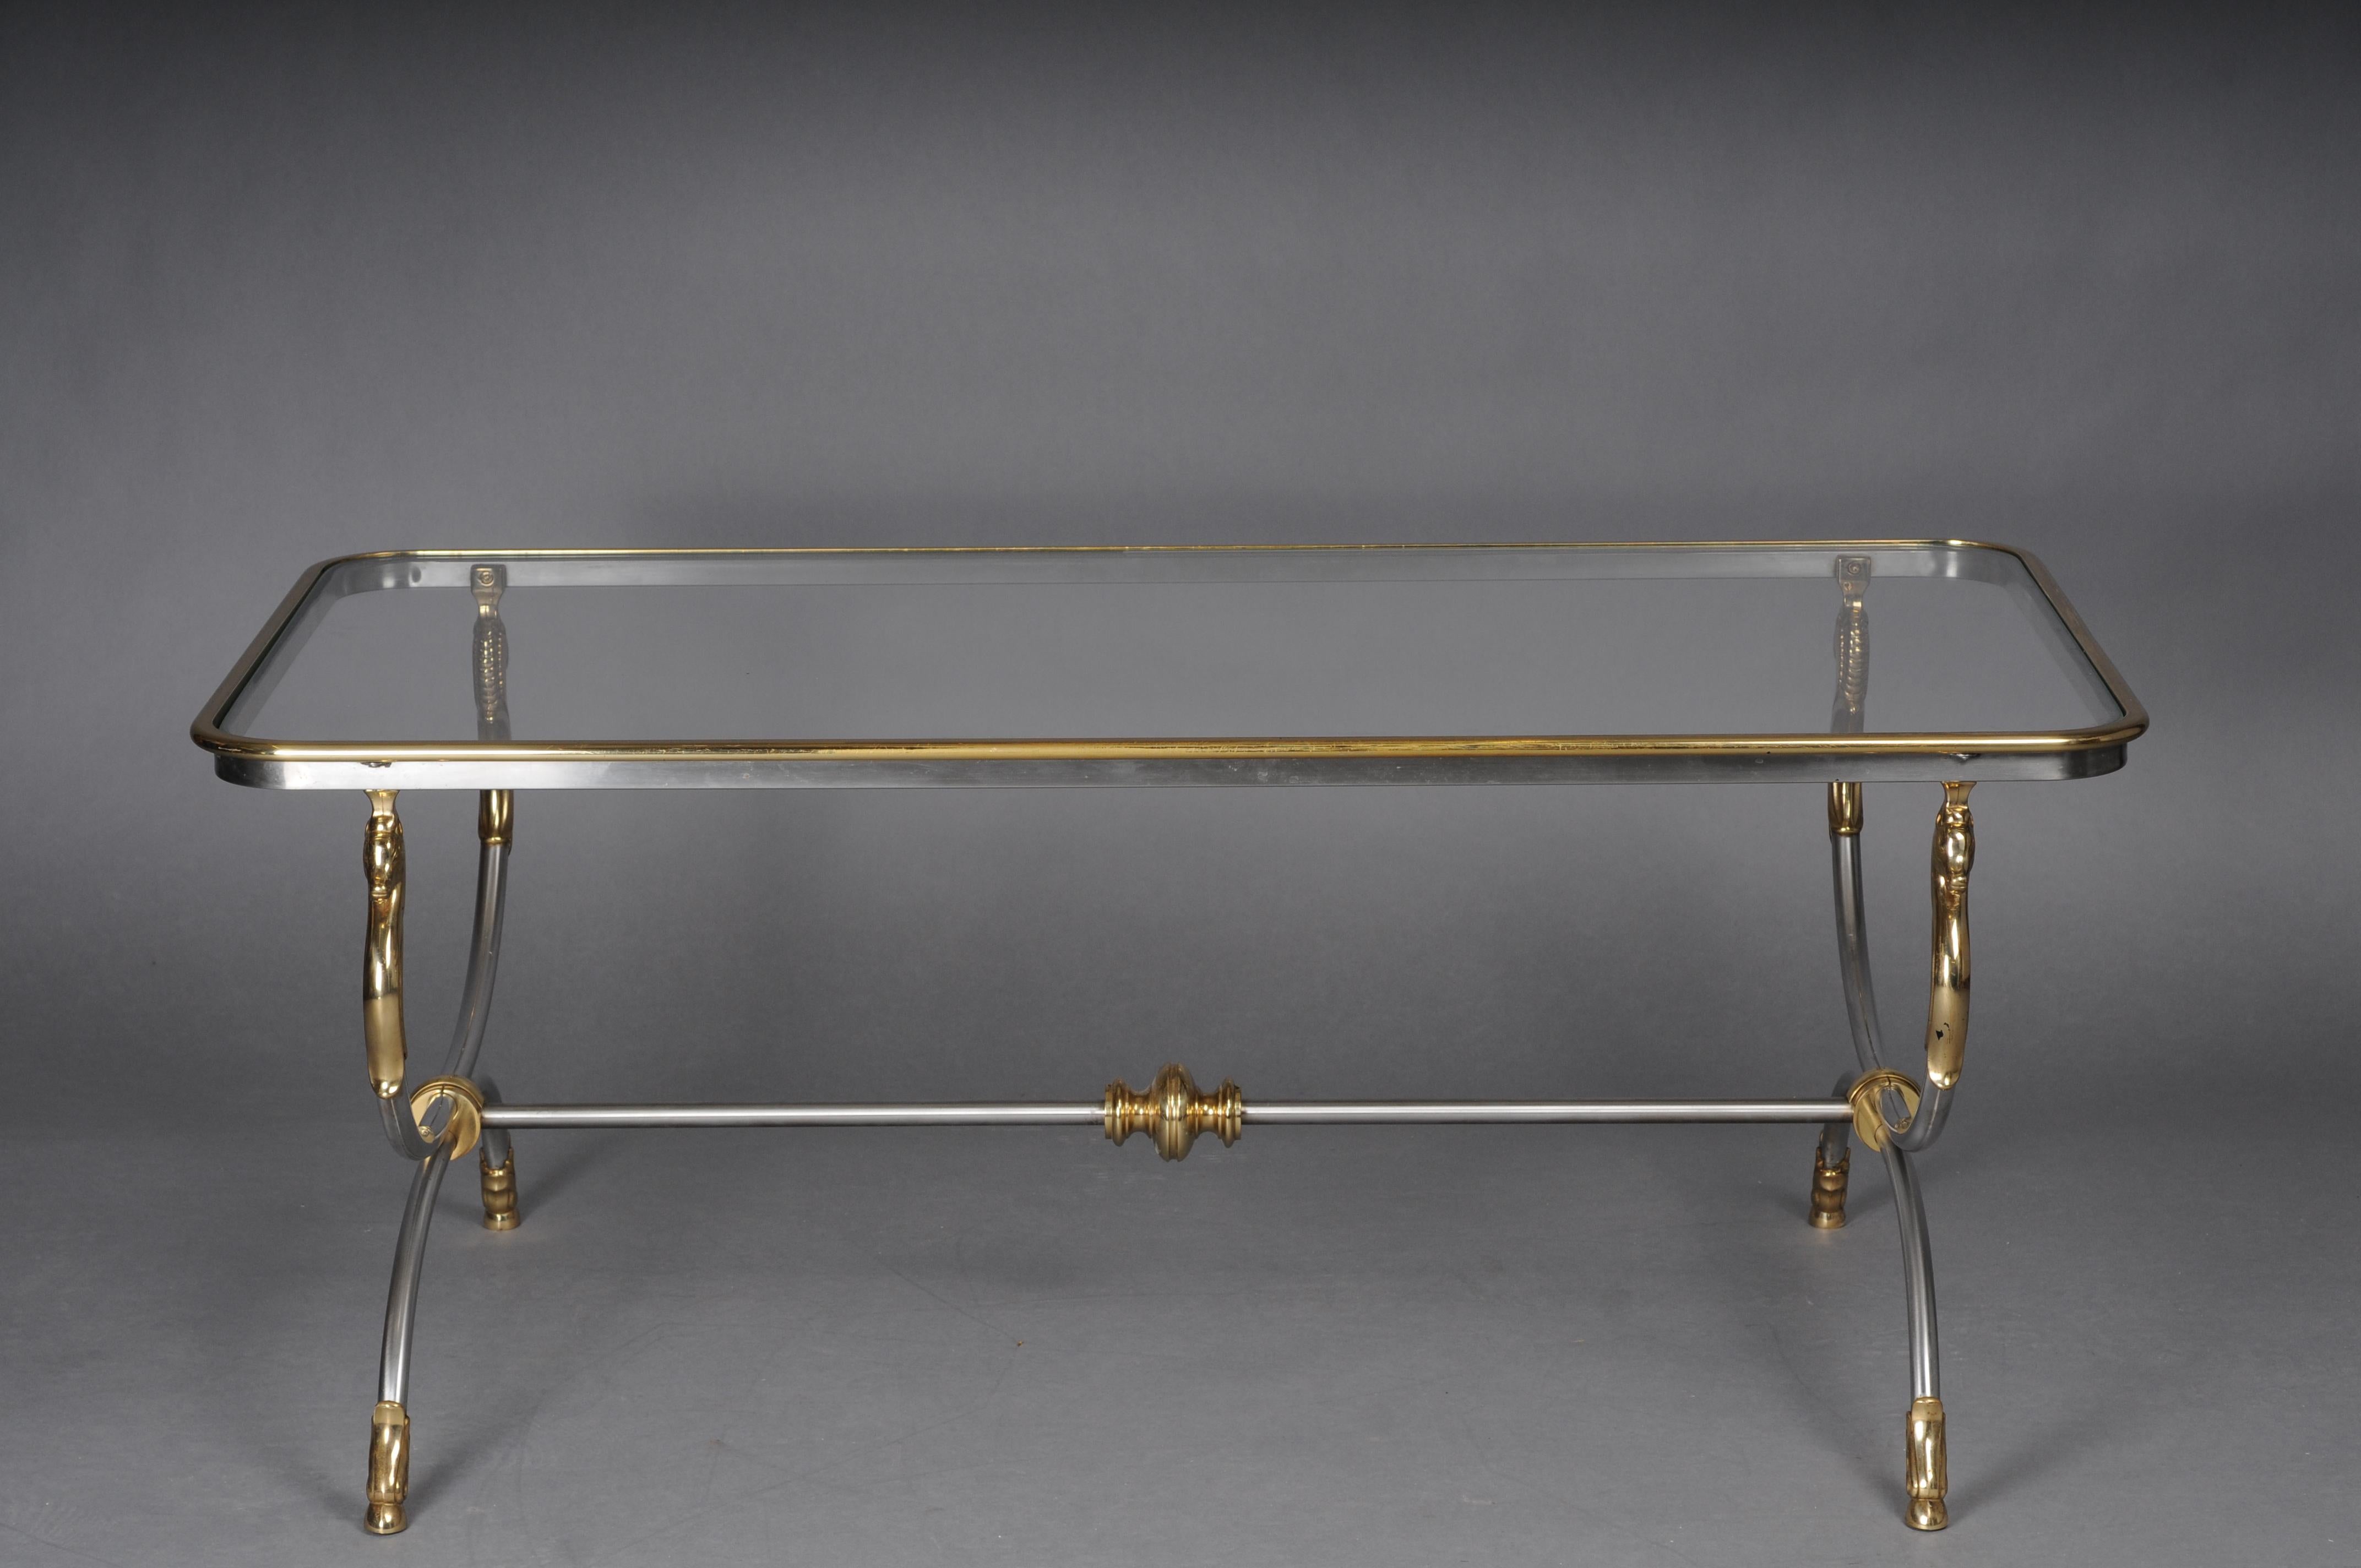 Modern designer coffee table, chrome brass, classical style

Chrome / brass frame, curved and flanked by horse busts in brass. Polished brass frame enclosed in a glass plate.

(A-170).